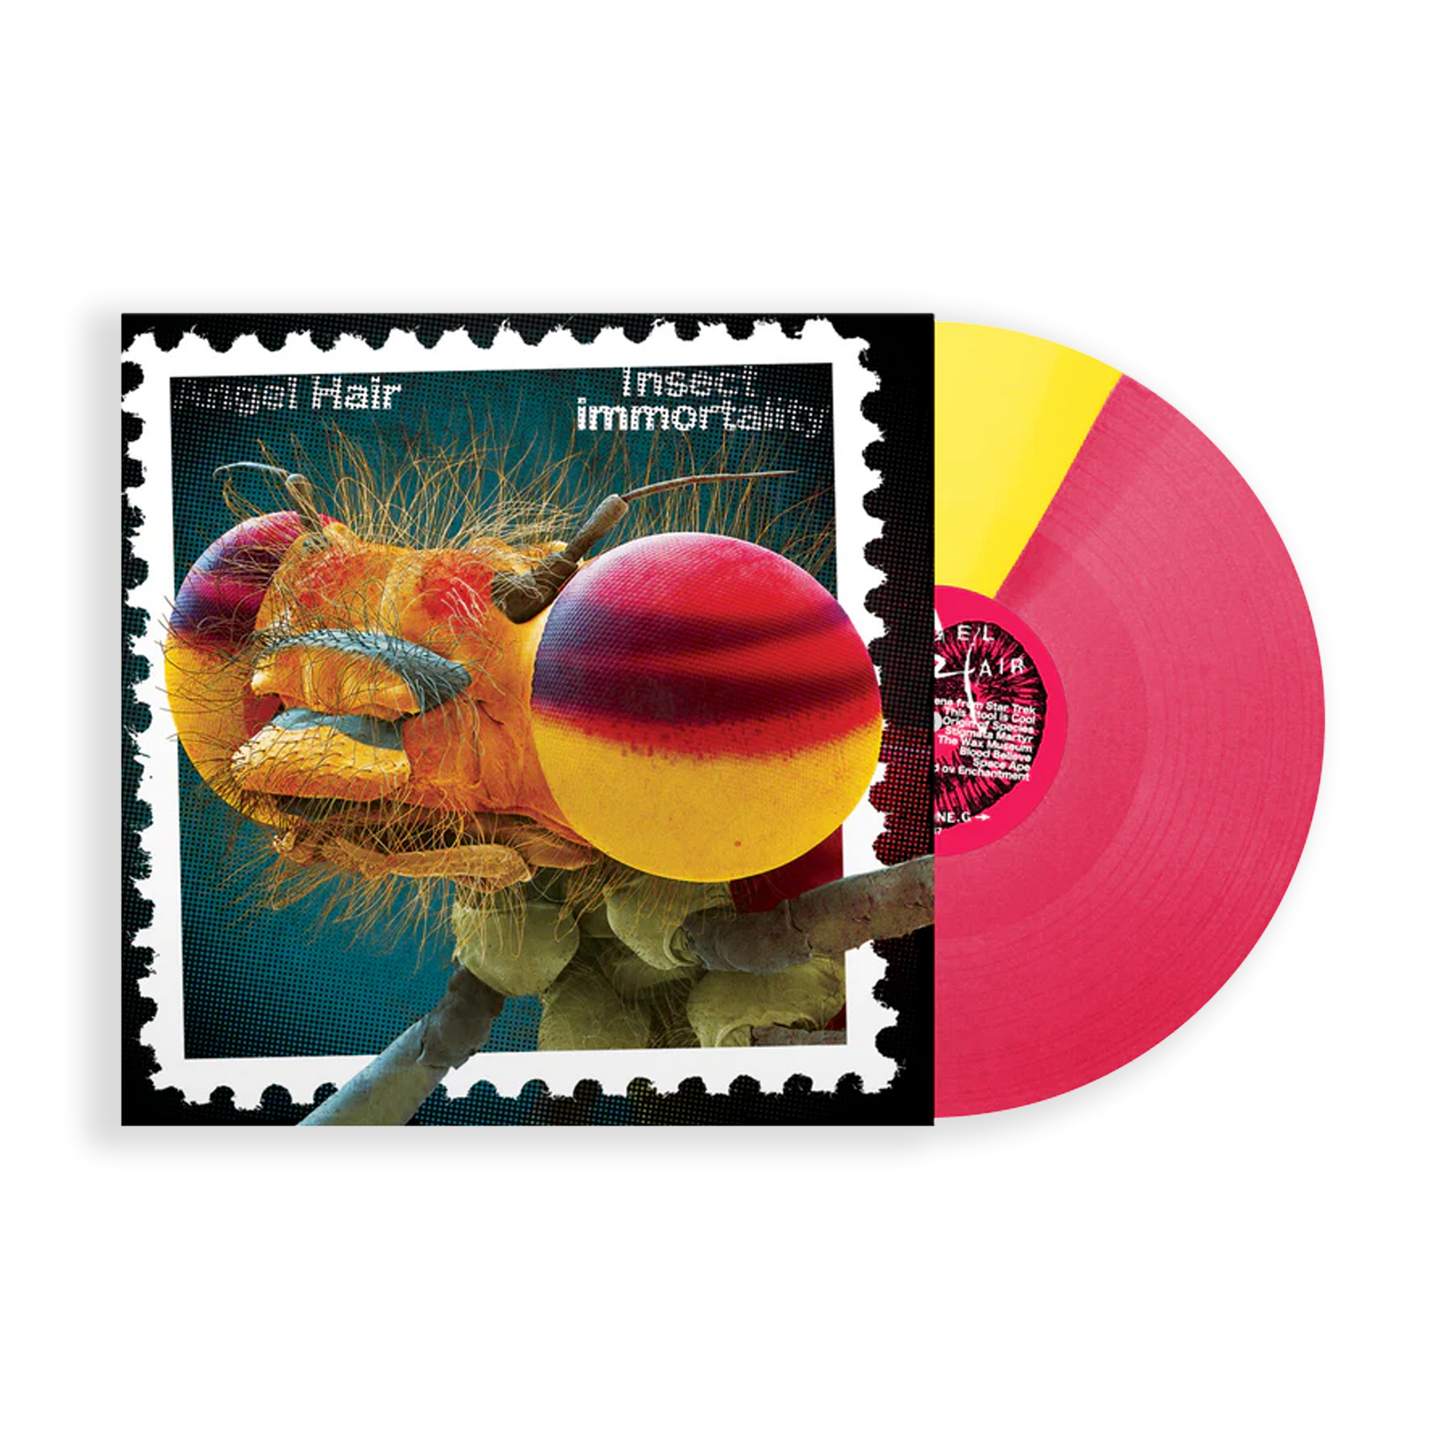 Angel Hair "Insect Immortality" LP